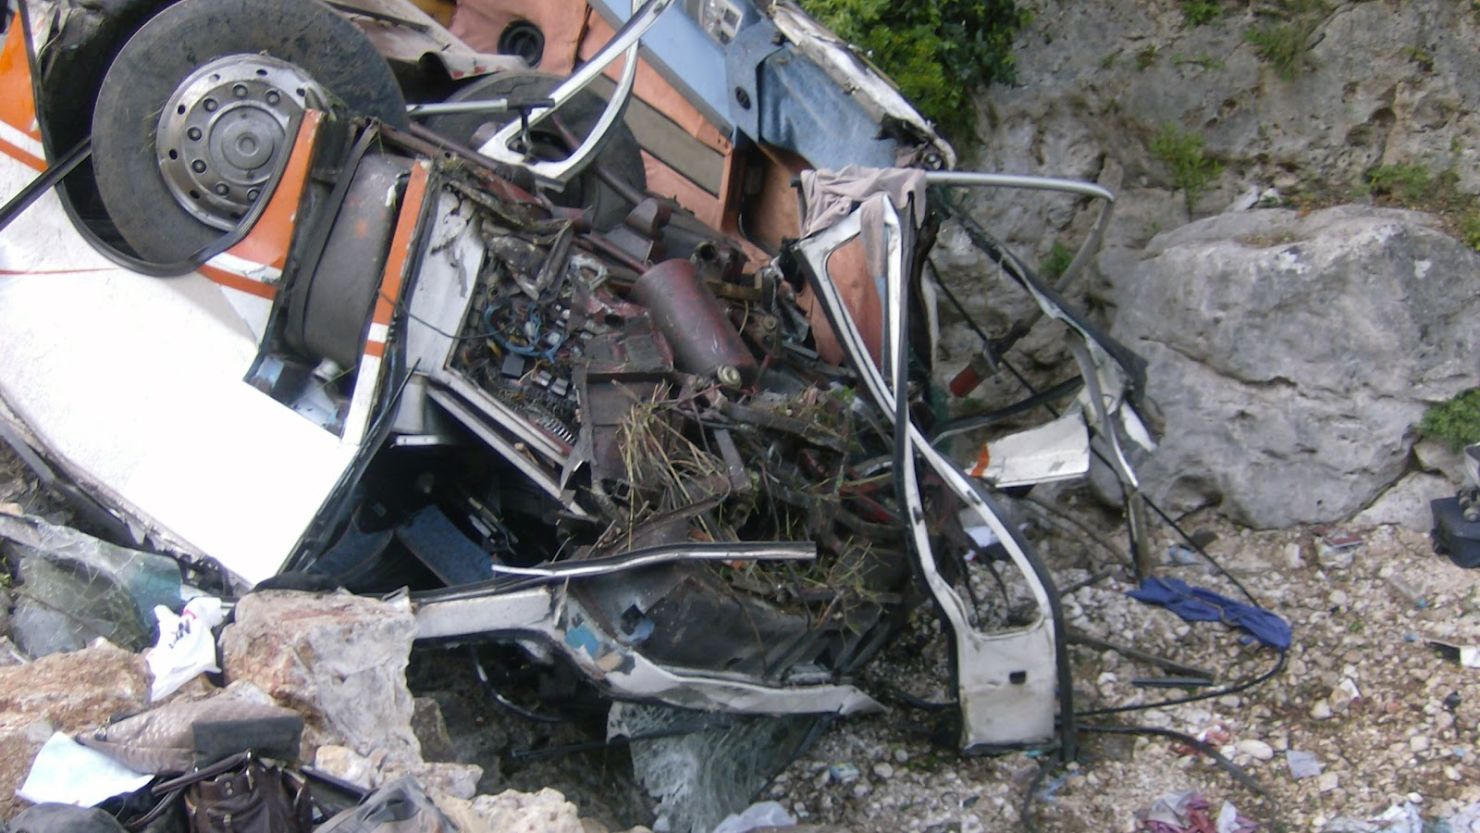 Albanian authorities say a bus carrying university students fell off a cliff Monday, killing at least 12 people.